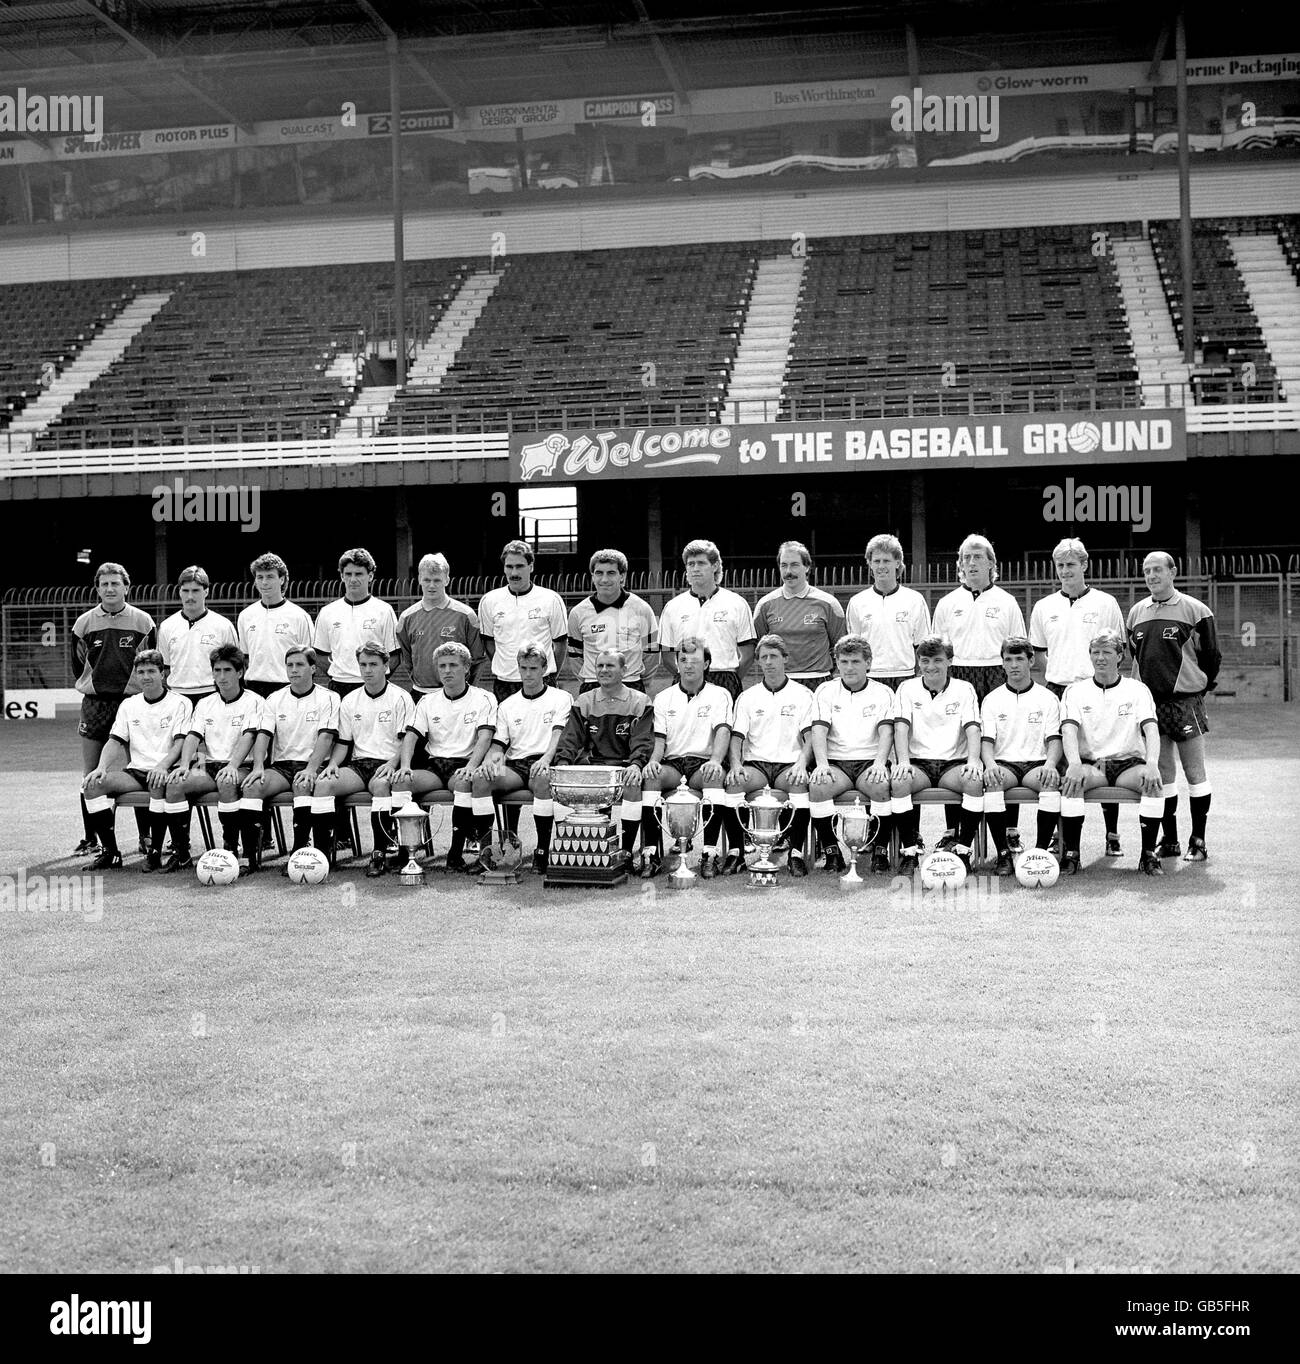 Derby County Photocall - Team gruppo Foto Stock